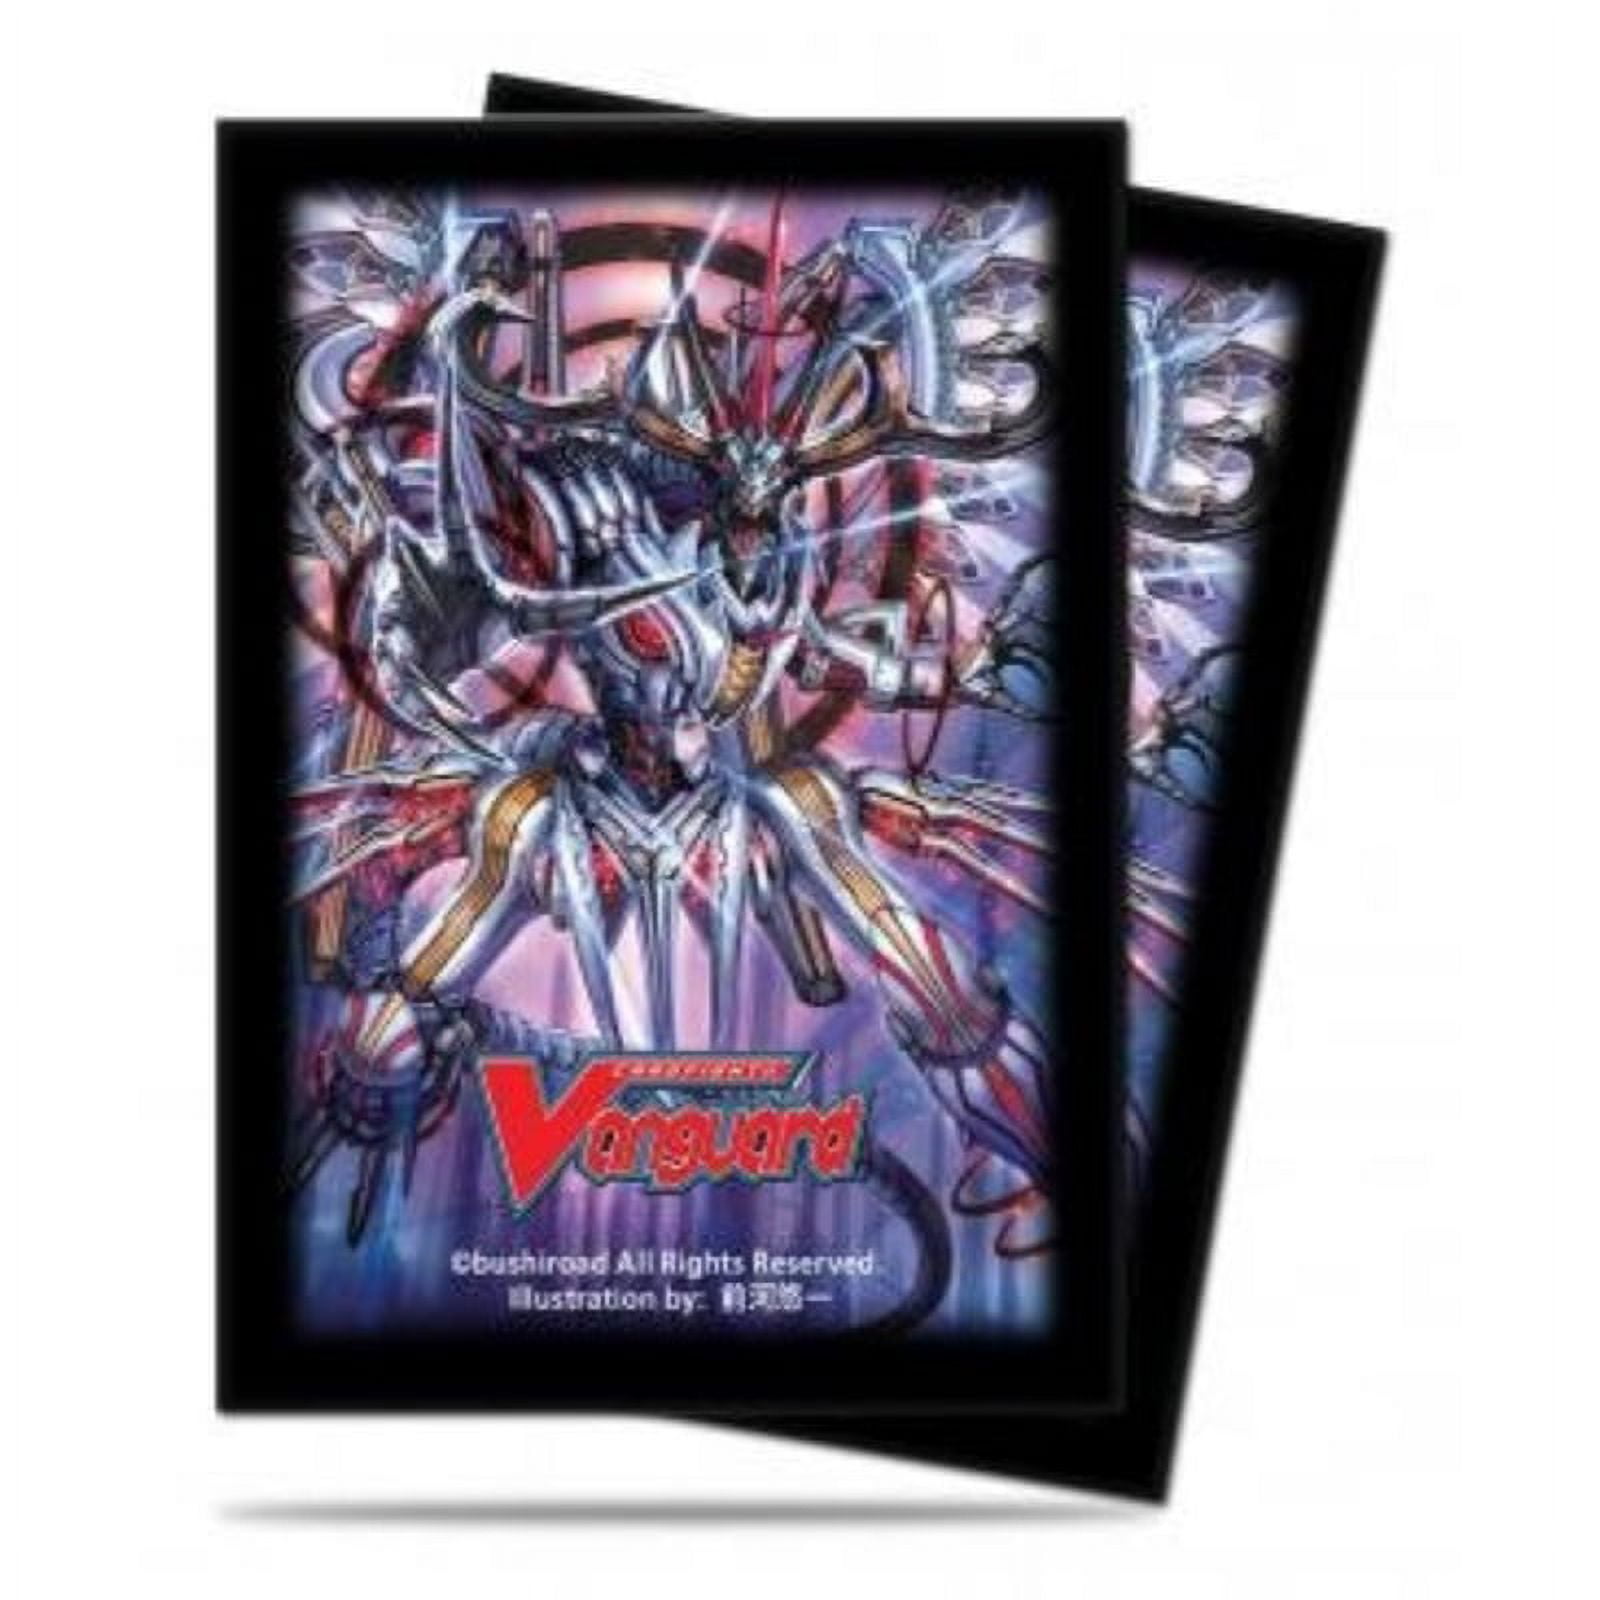 YUGIOH CARD PROTECTORS, SLEEVES PACK OF NEW 50-COUNT, THE DARK SIDE OF  DIMENSIONS - Supplies  Trading Card Mint - Yugioh, Cardfight Vanguard,  Trading Cards Cheap, Fast, Mint For Over 25 Years